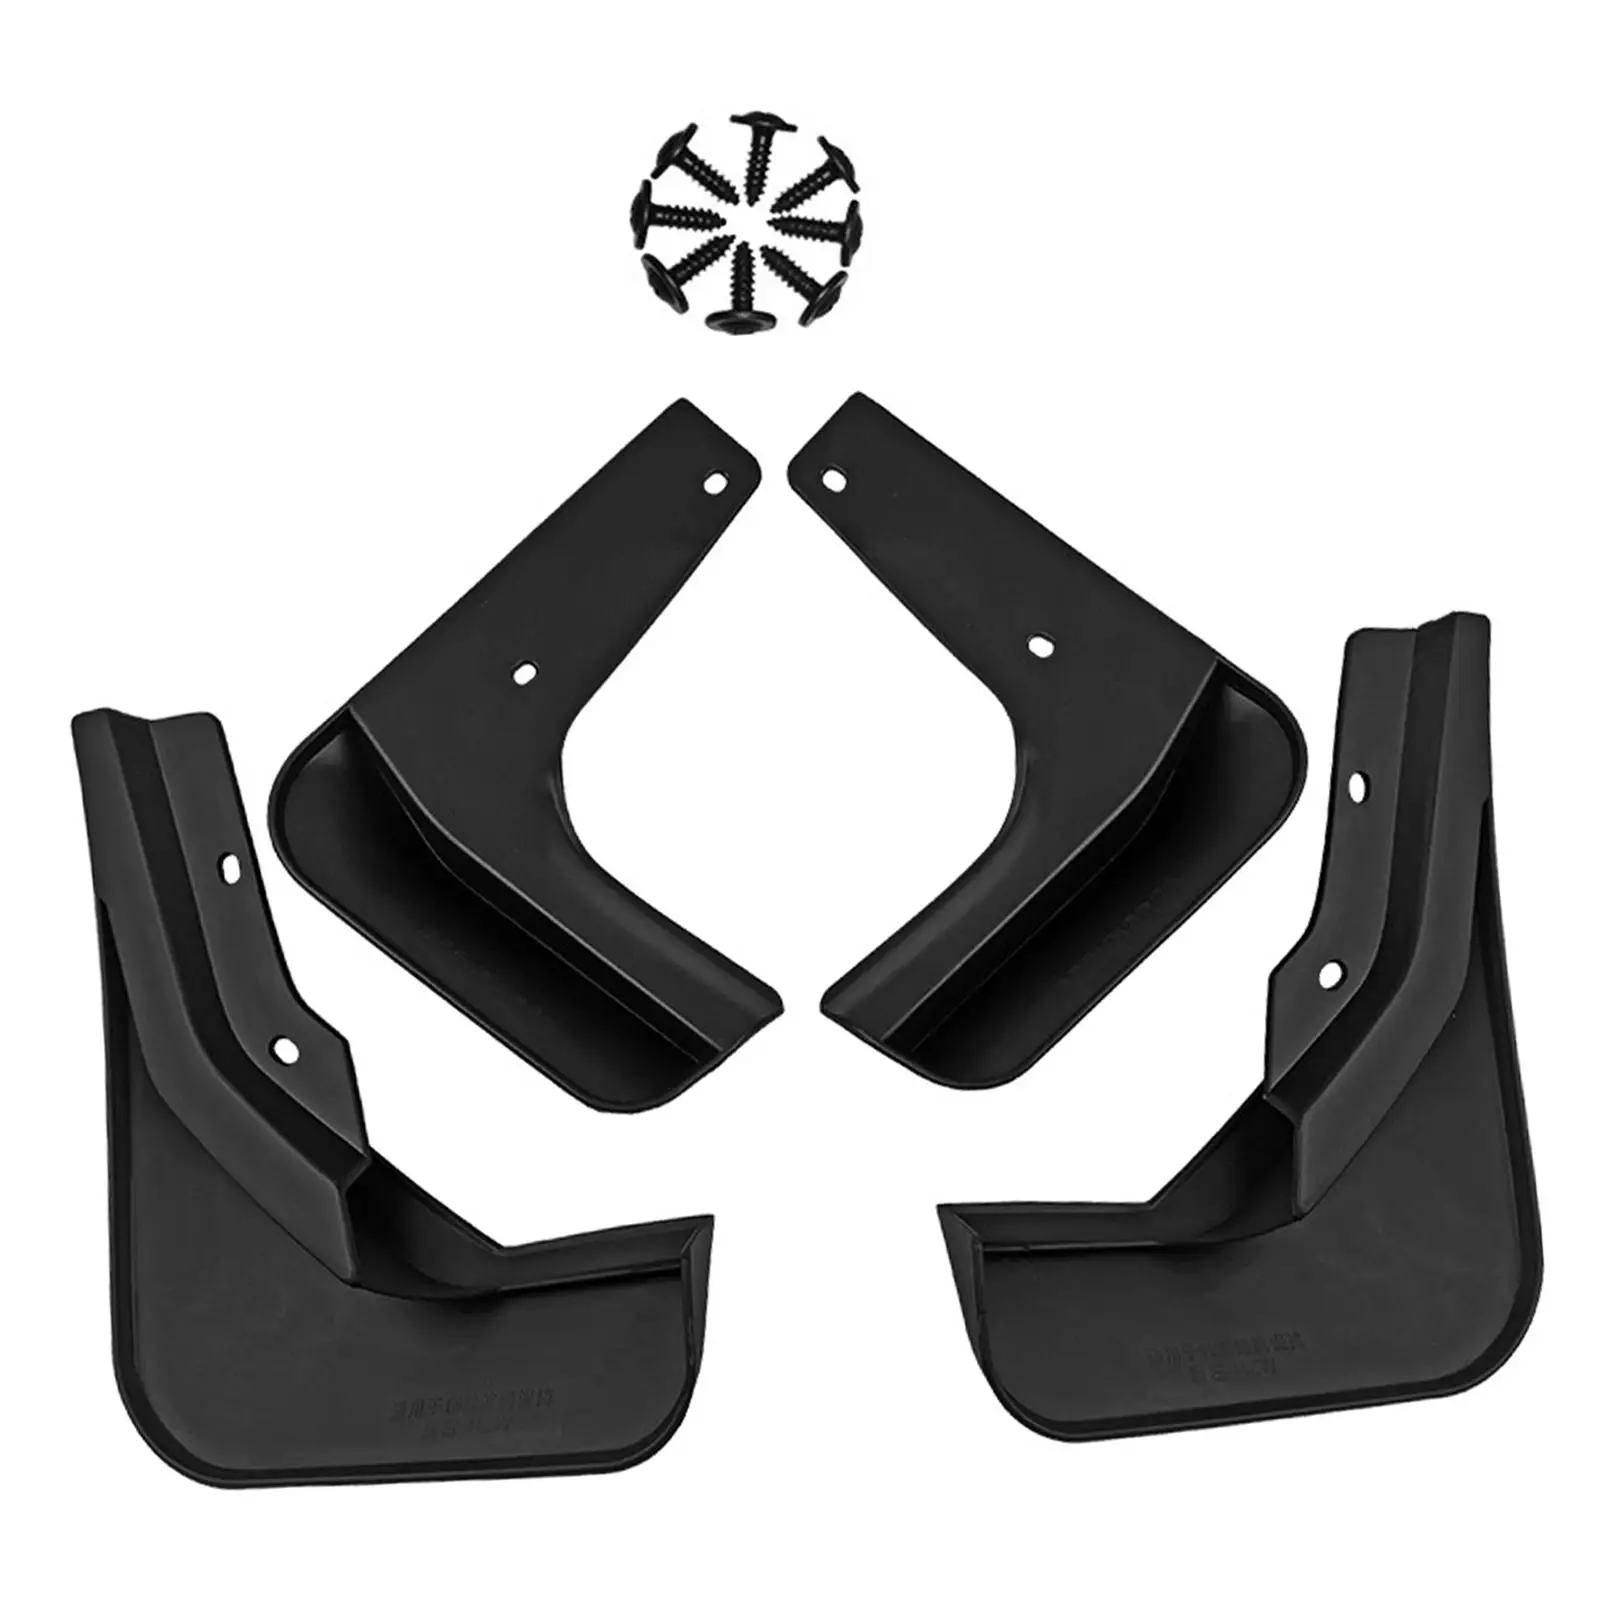 4x Mud Flaps Splash Guards Front and Rear Side Mudguard Fender for Volkswagen Jetta Sagitar High Reliability Repair Part